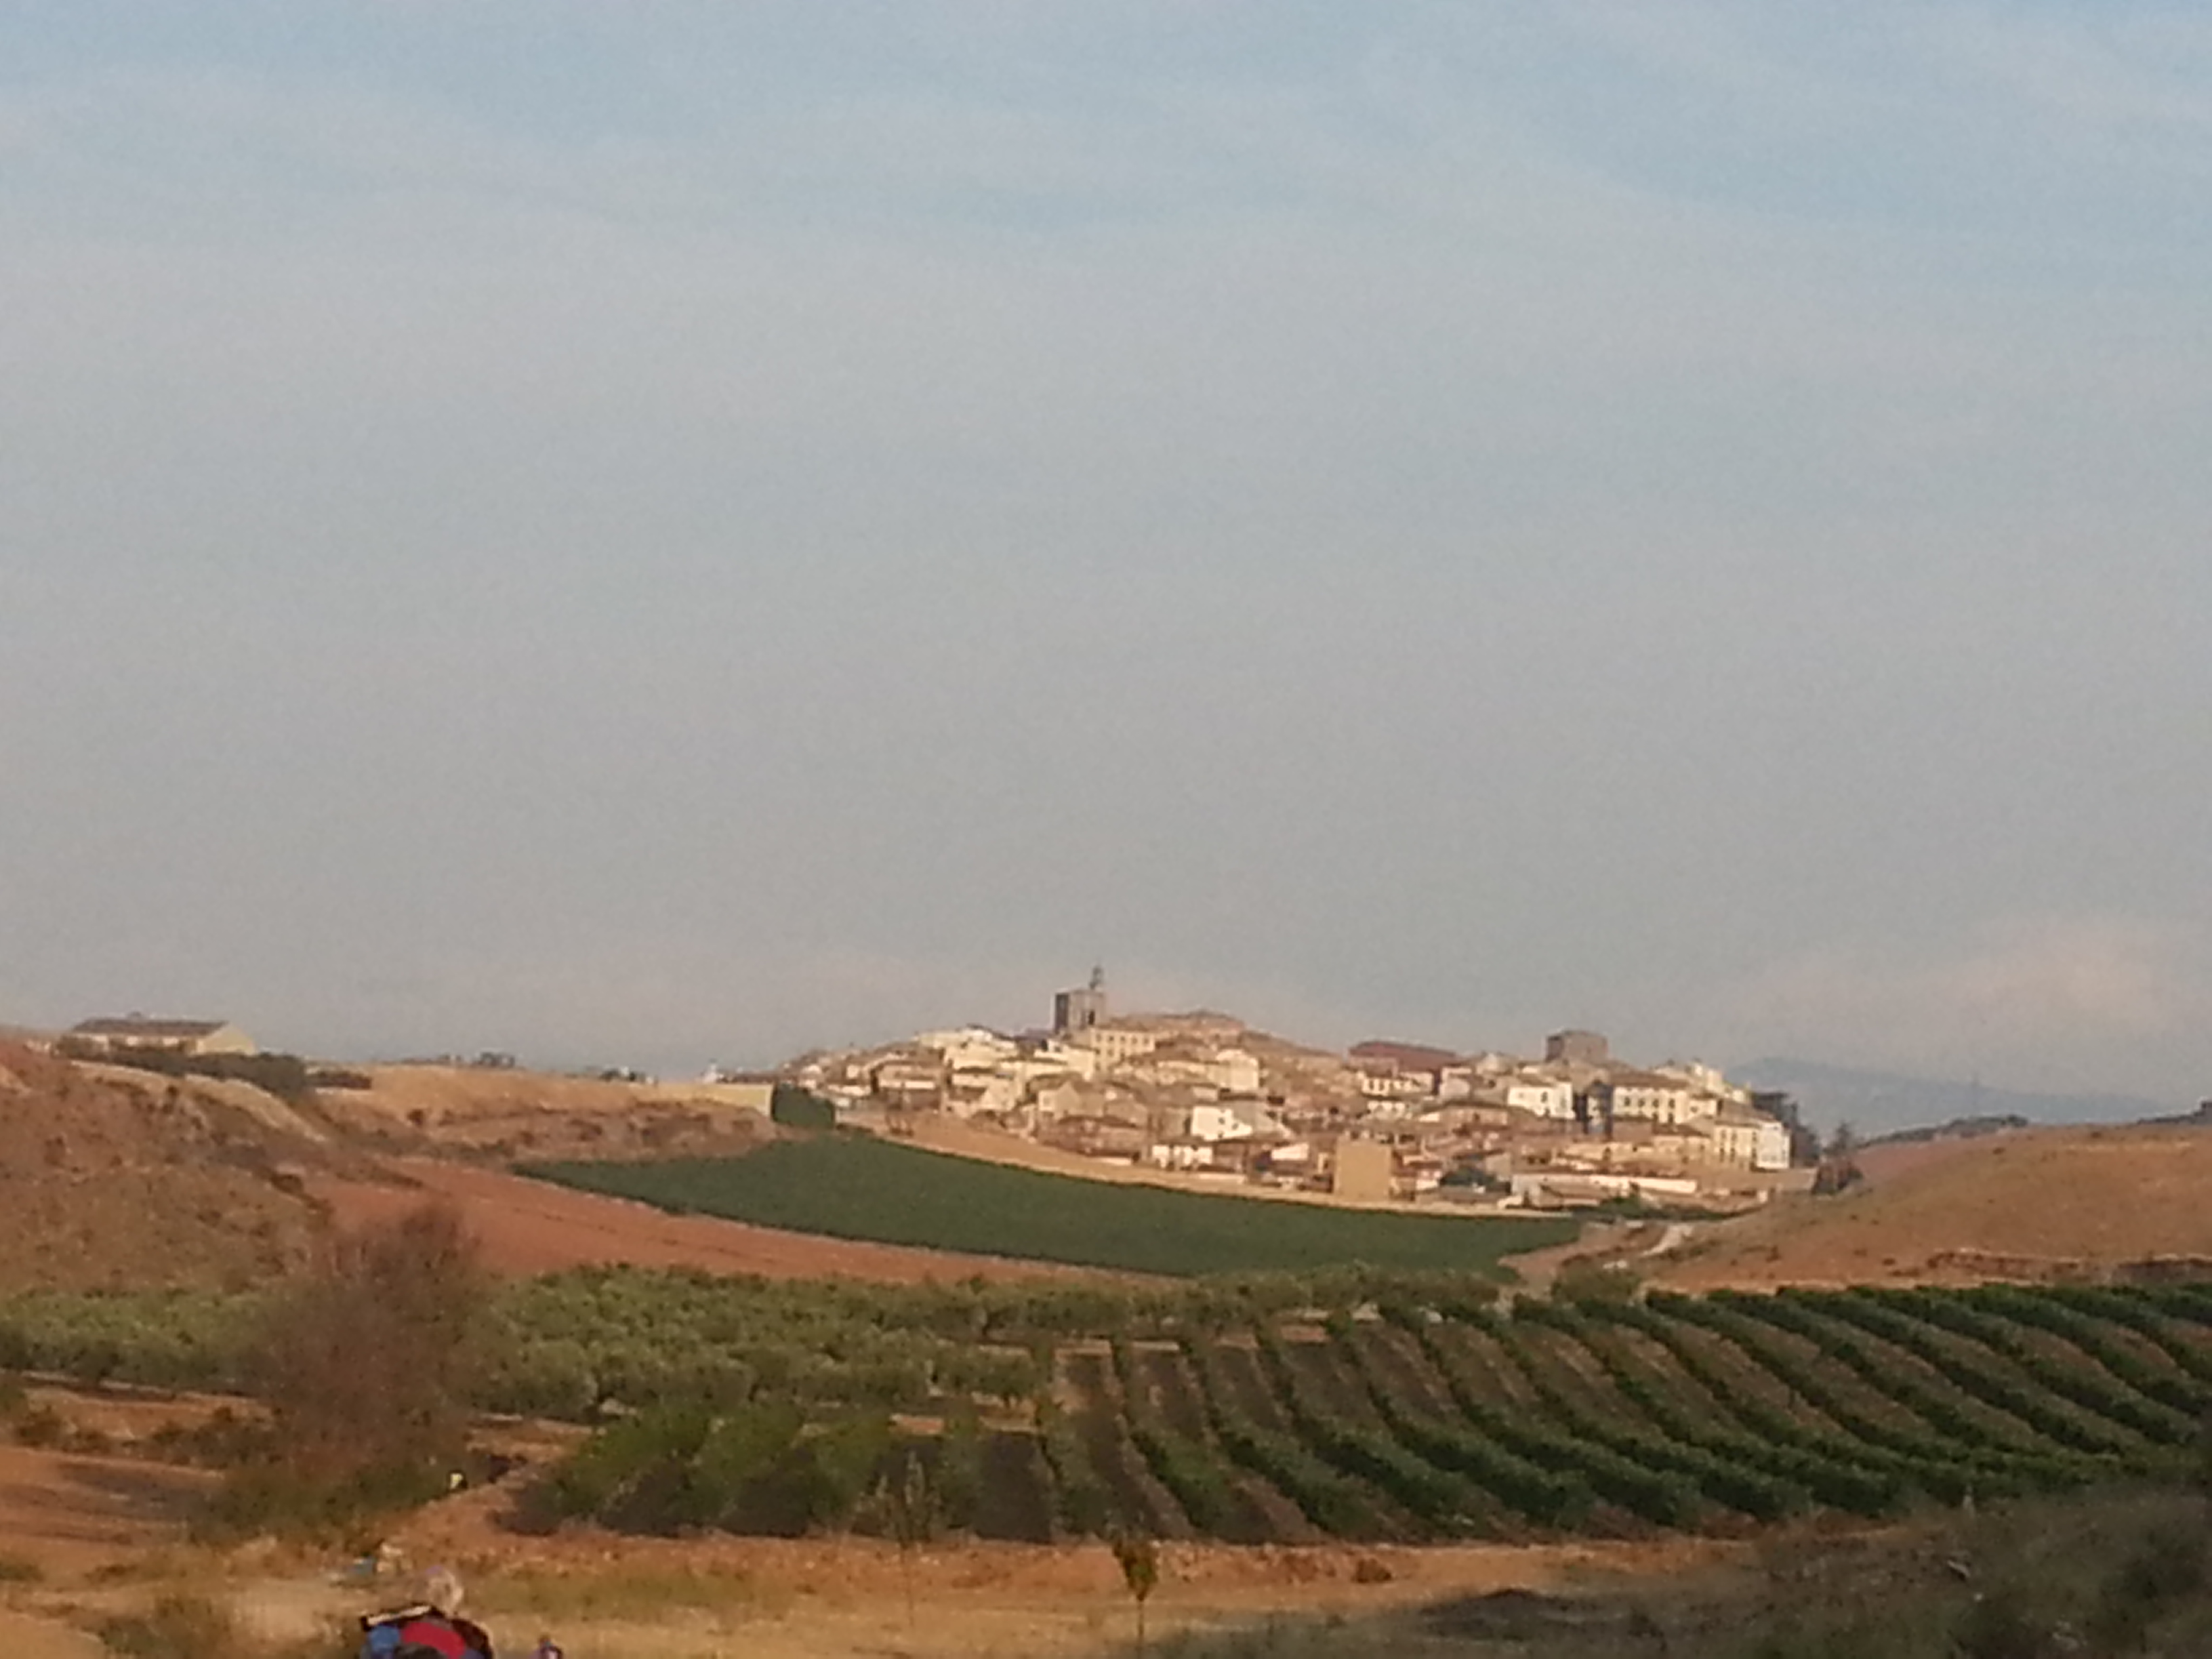 View of Mañeru surrounded by wineyards and green fields